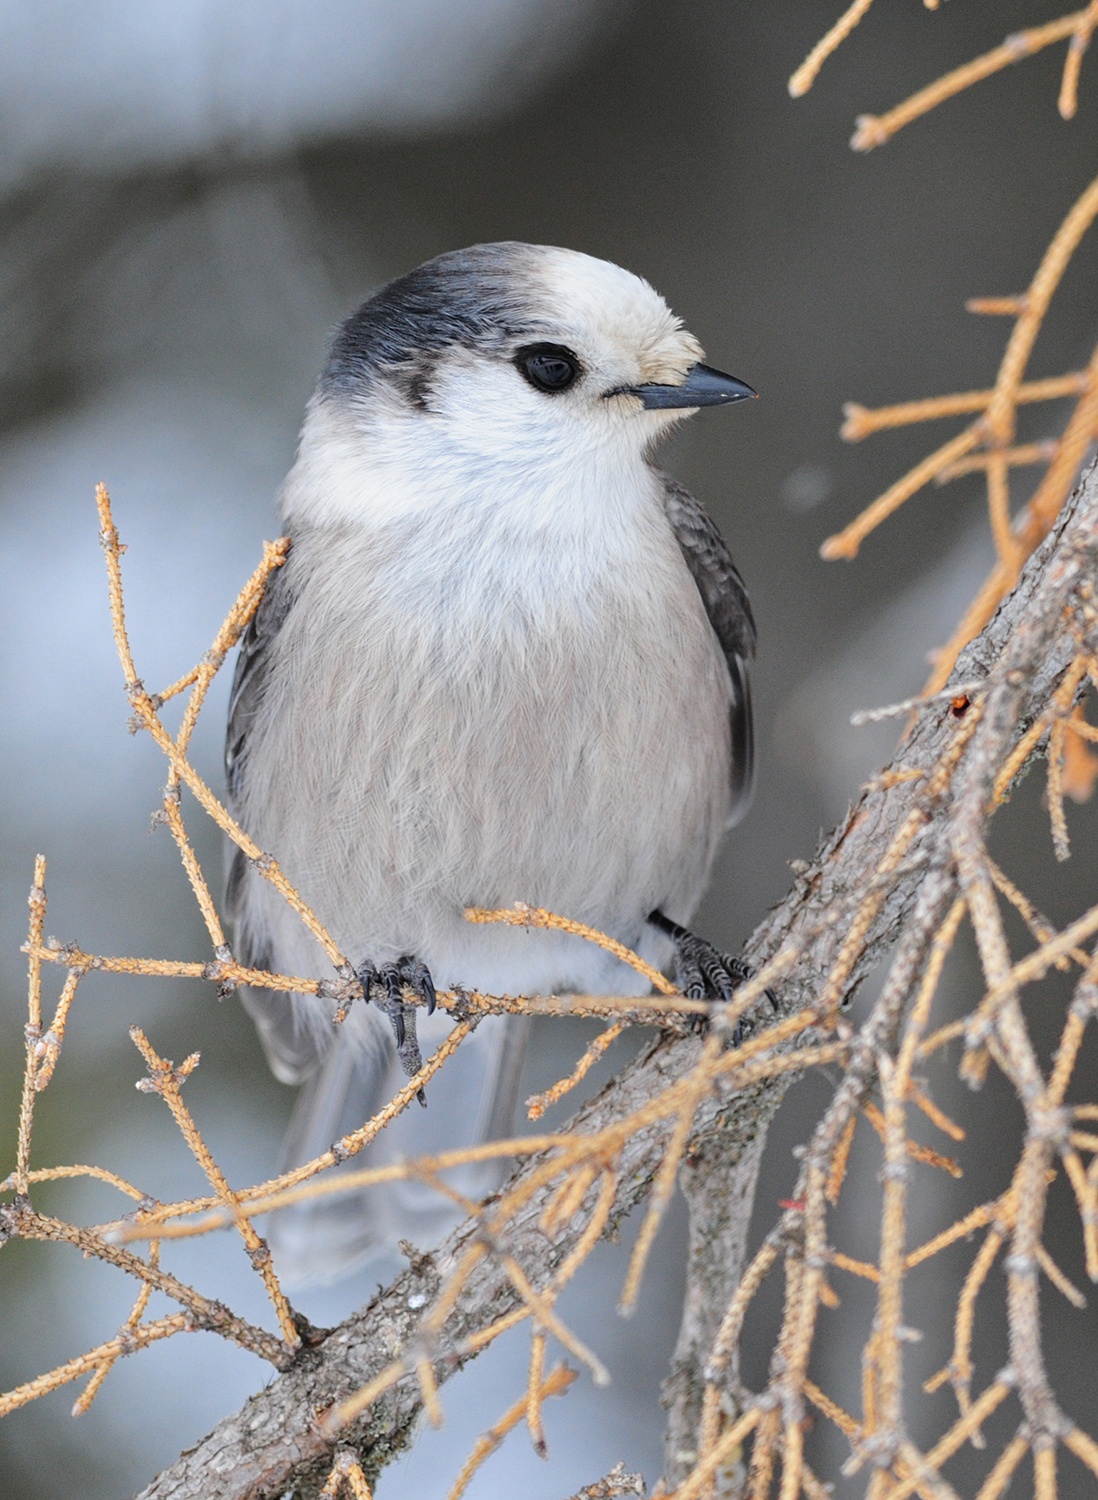 REGAL - This Gray Jay birdie was photographed by Myrna Pearman